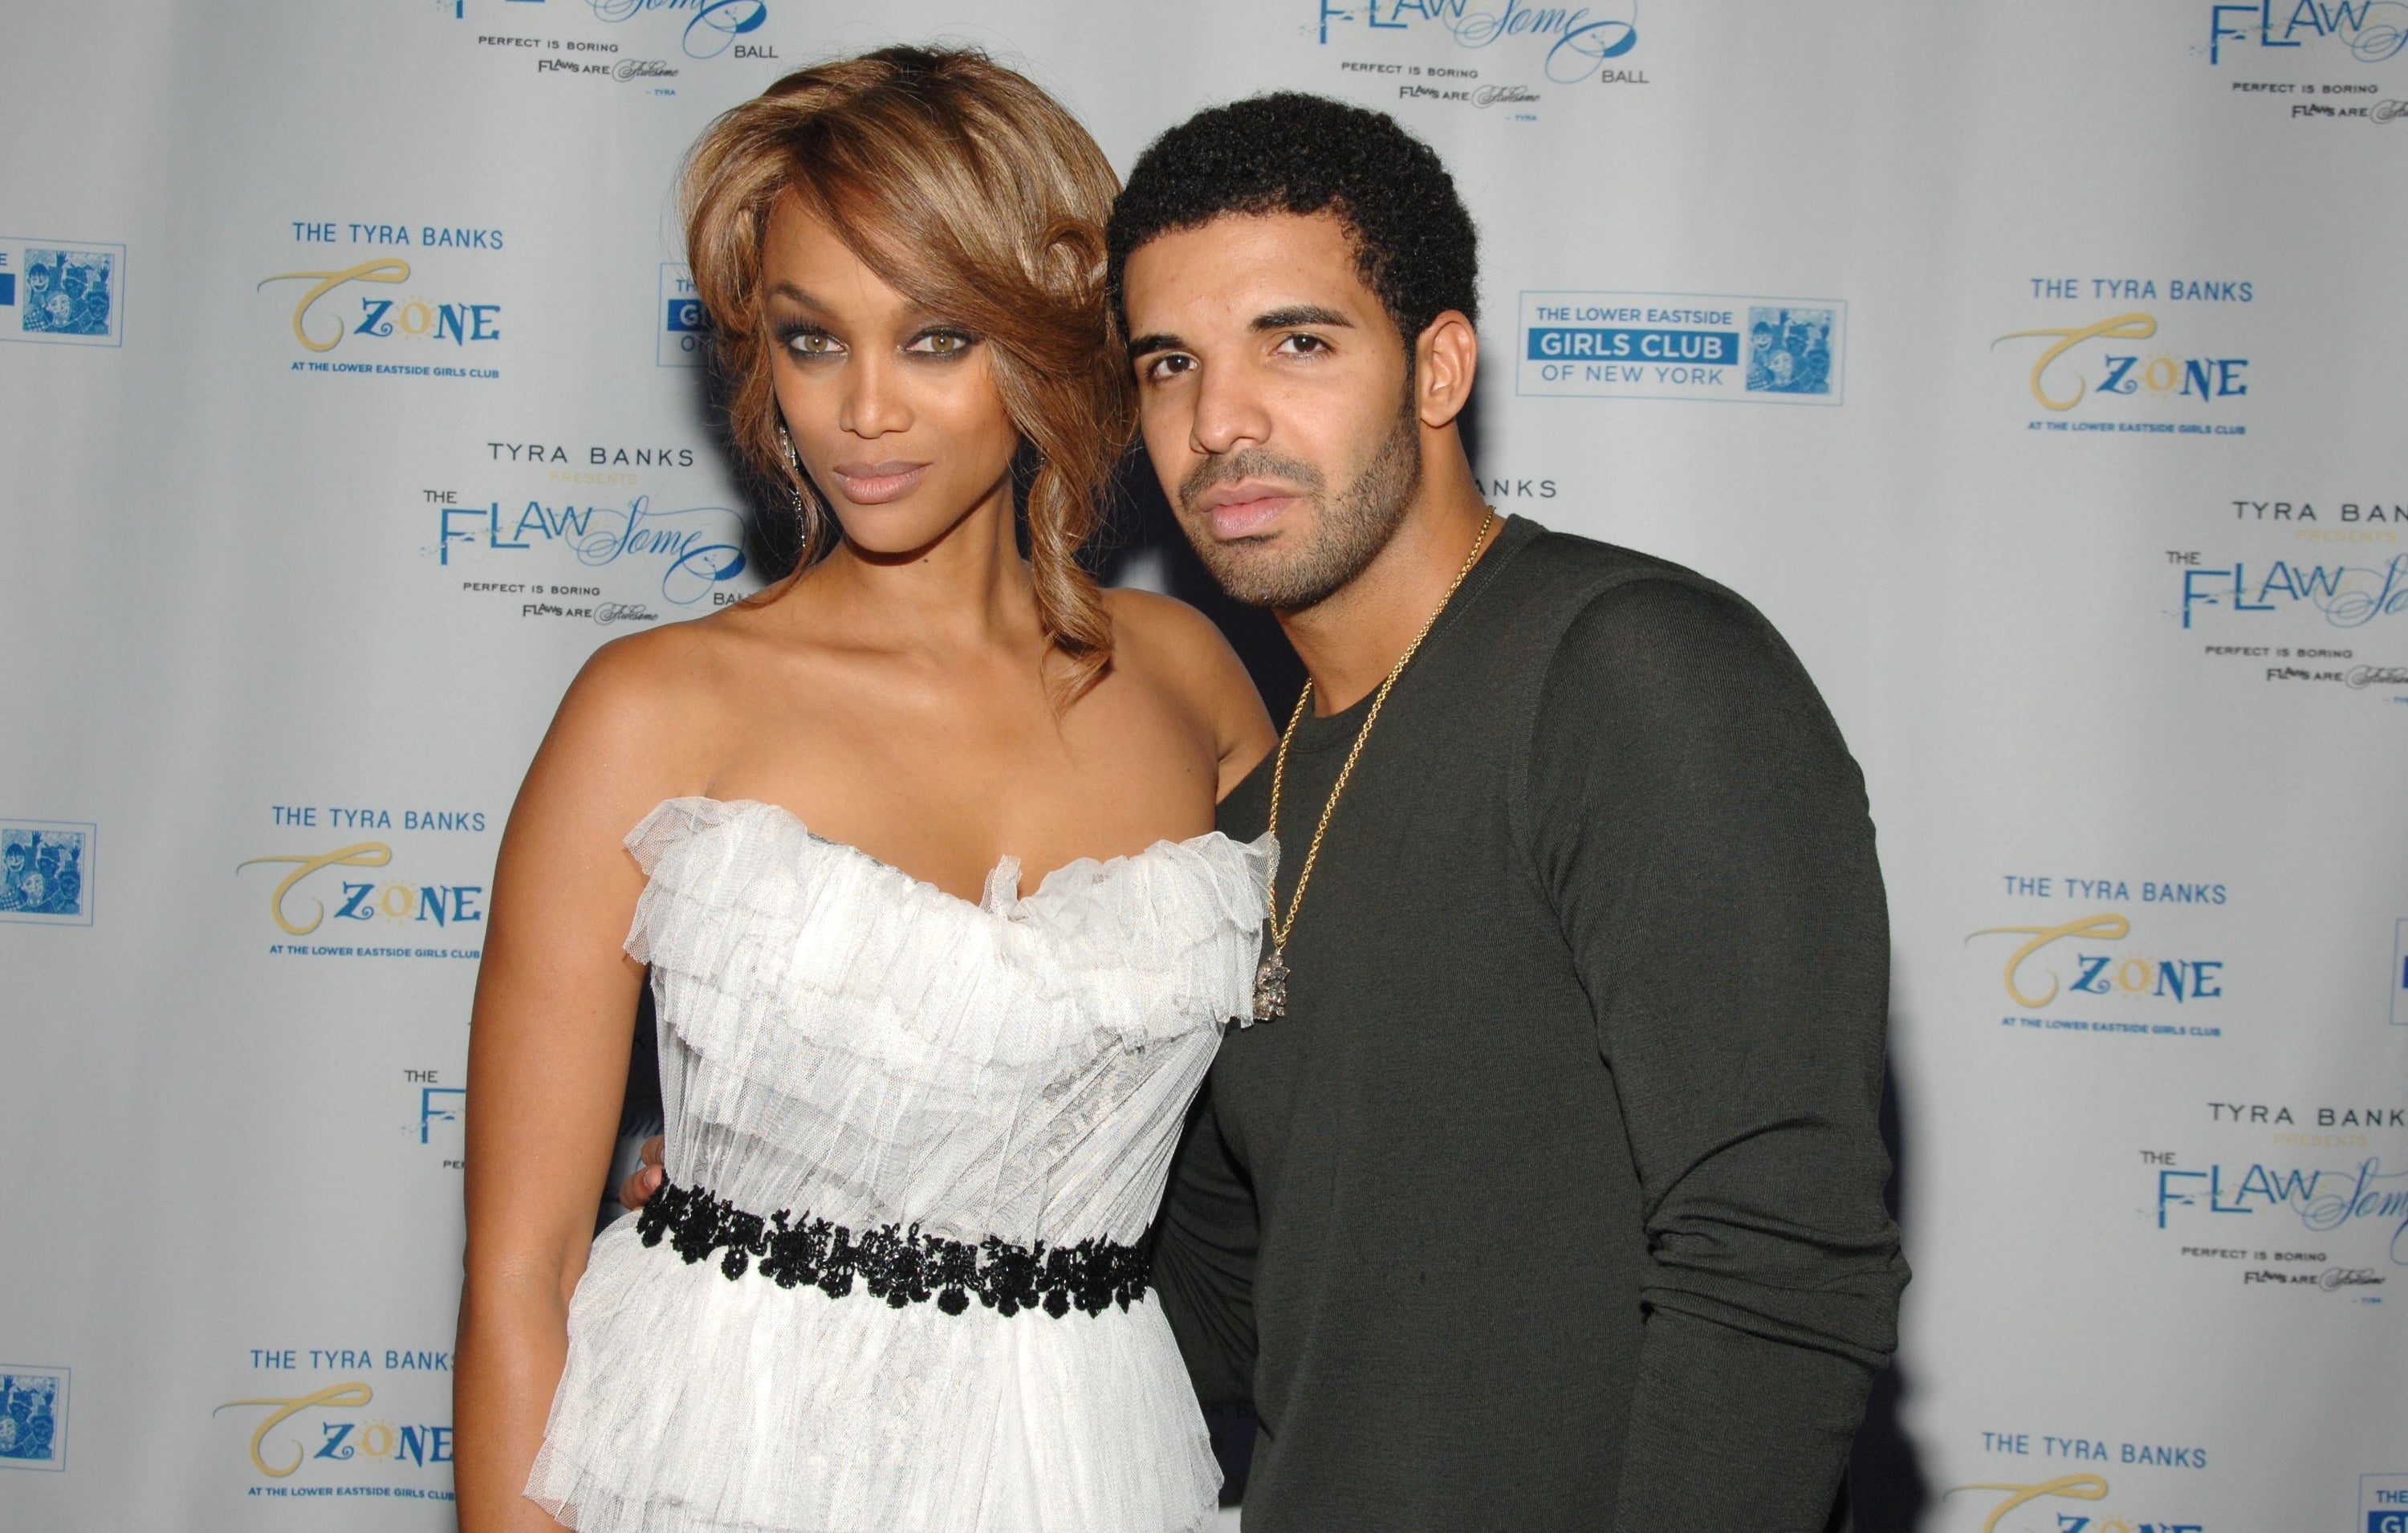 Tyra Banks and Drake attend the Flawsome Ball